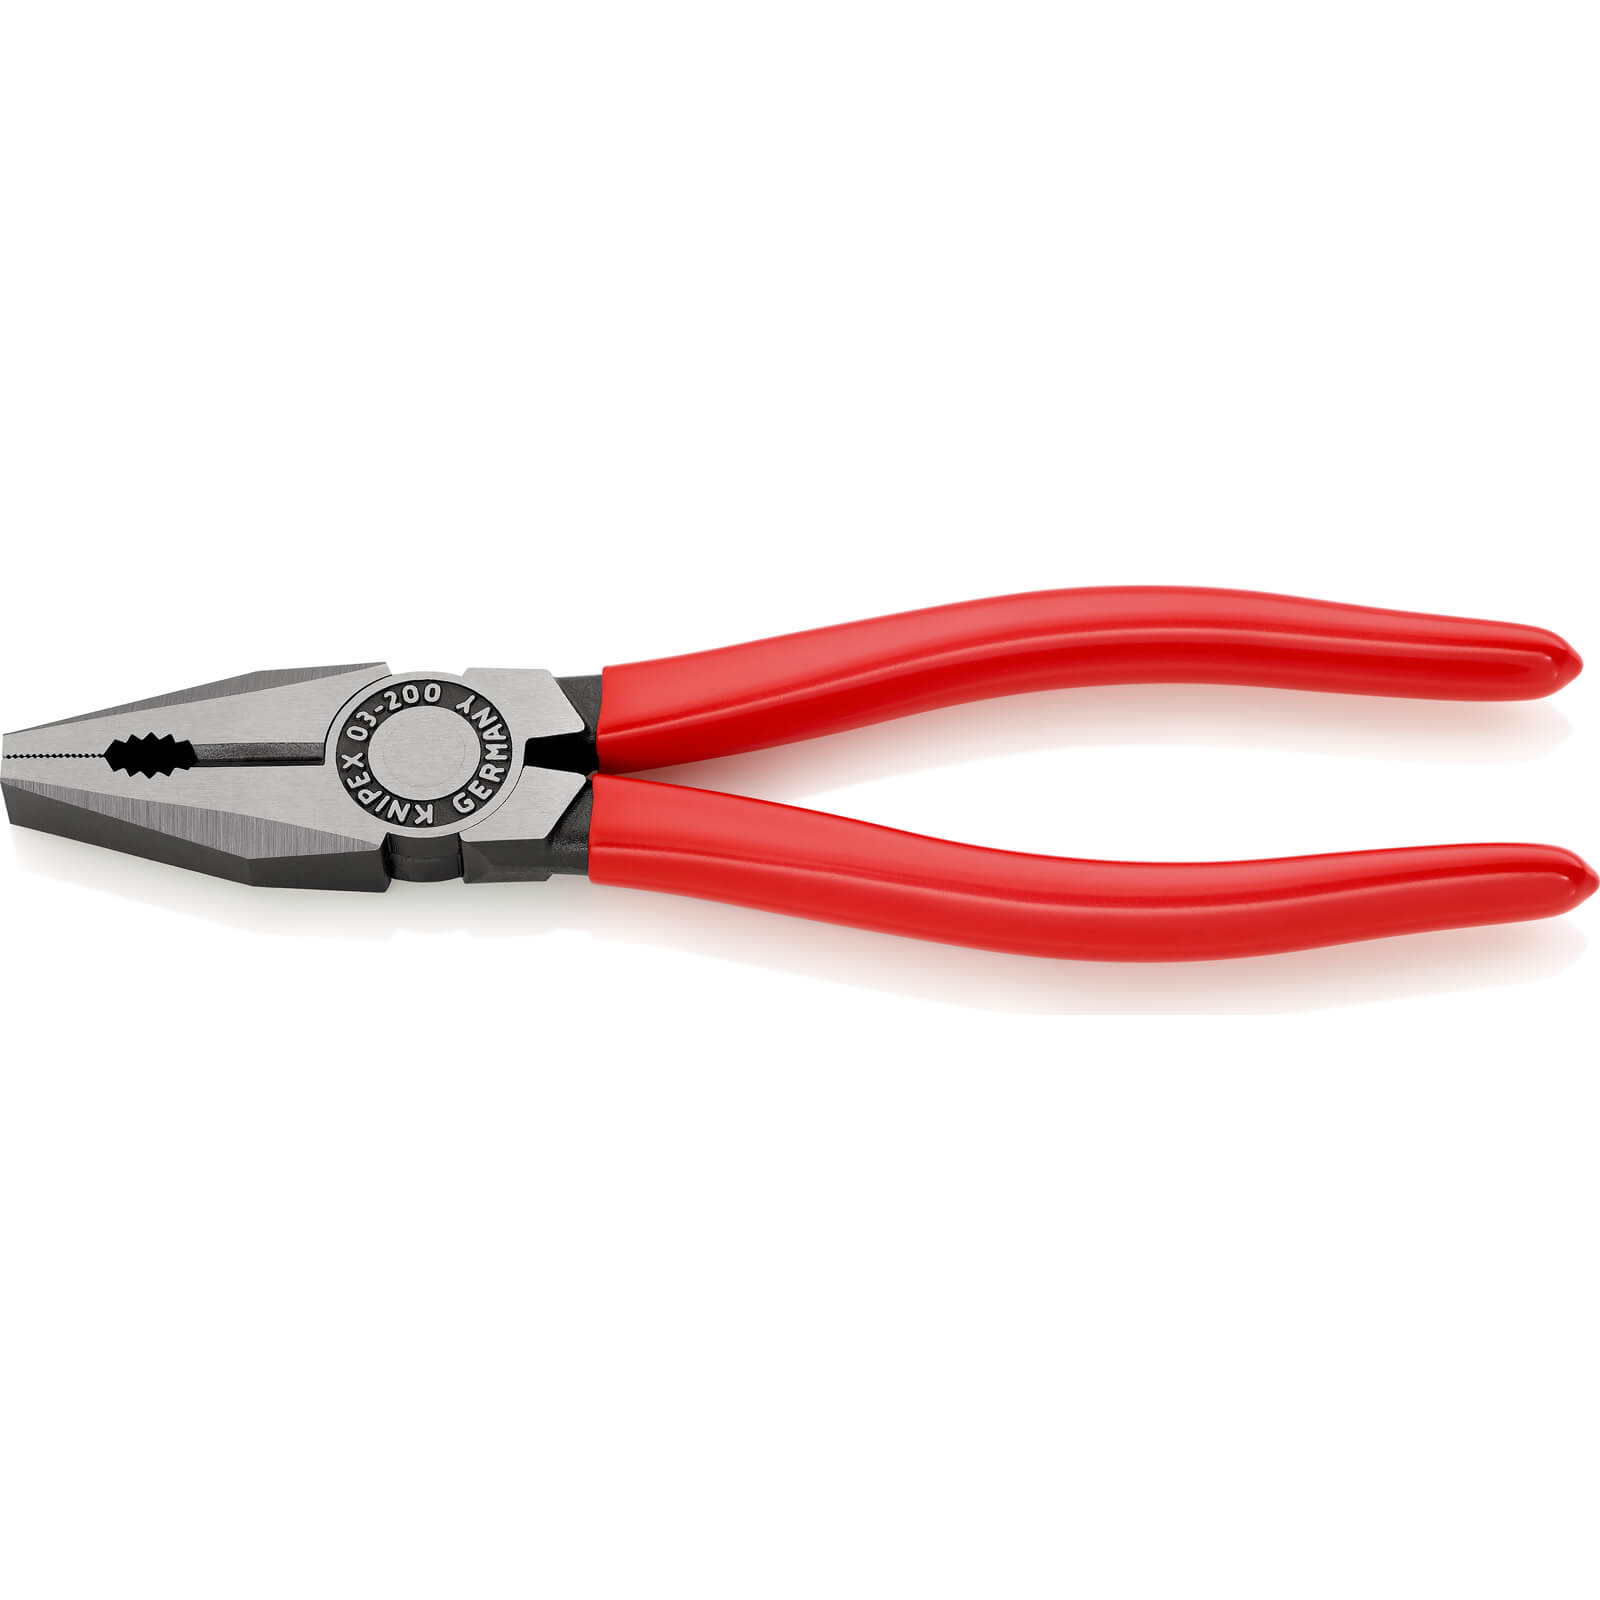 Image of Knipex 03 01 Combination Pliers 200mm